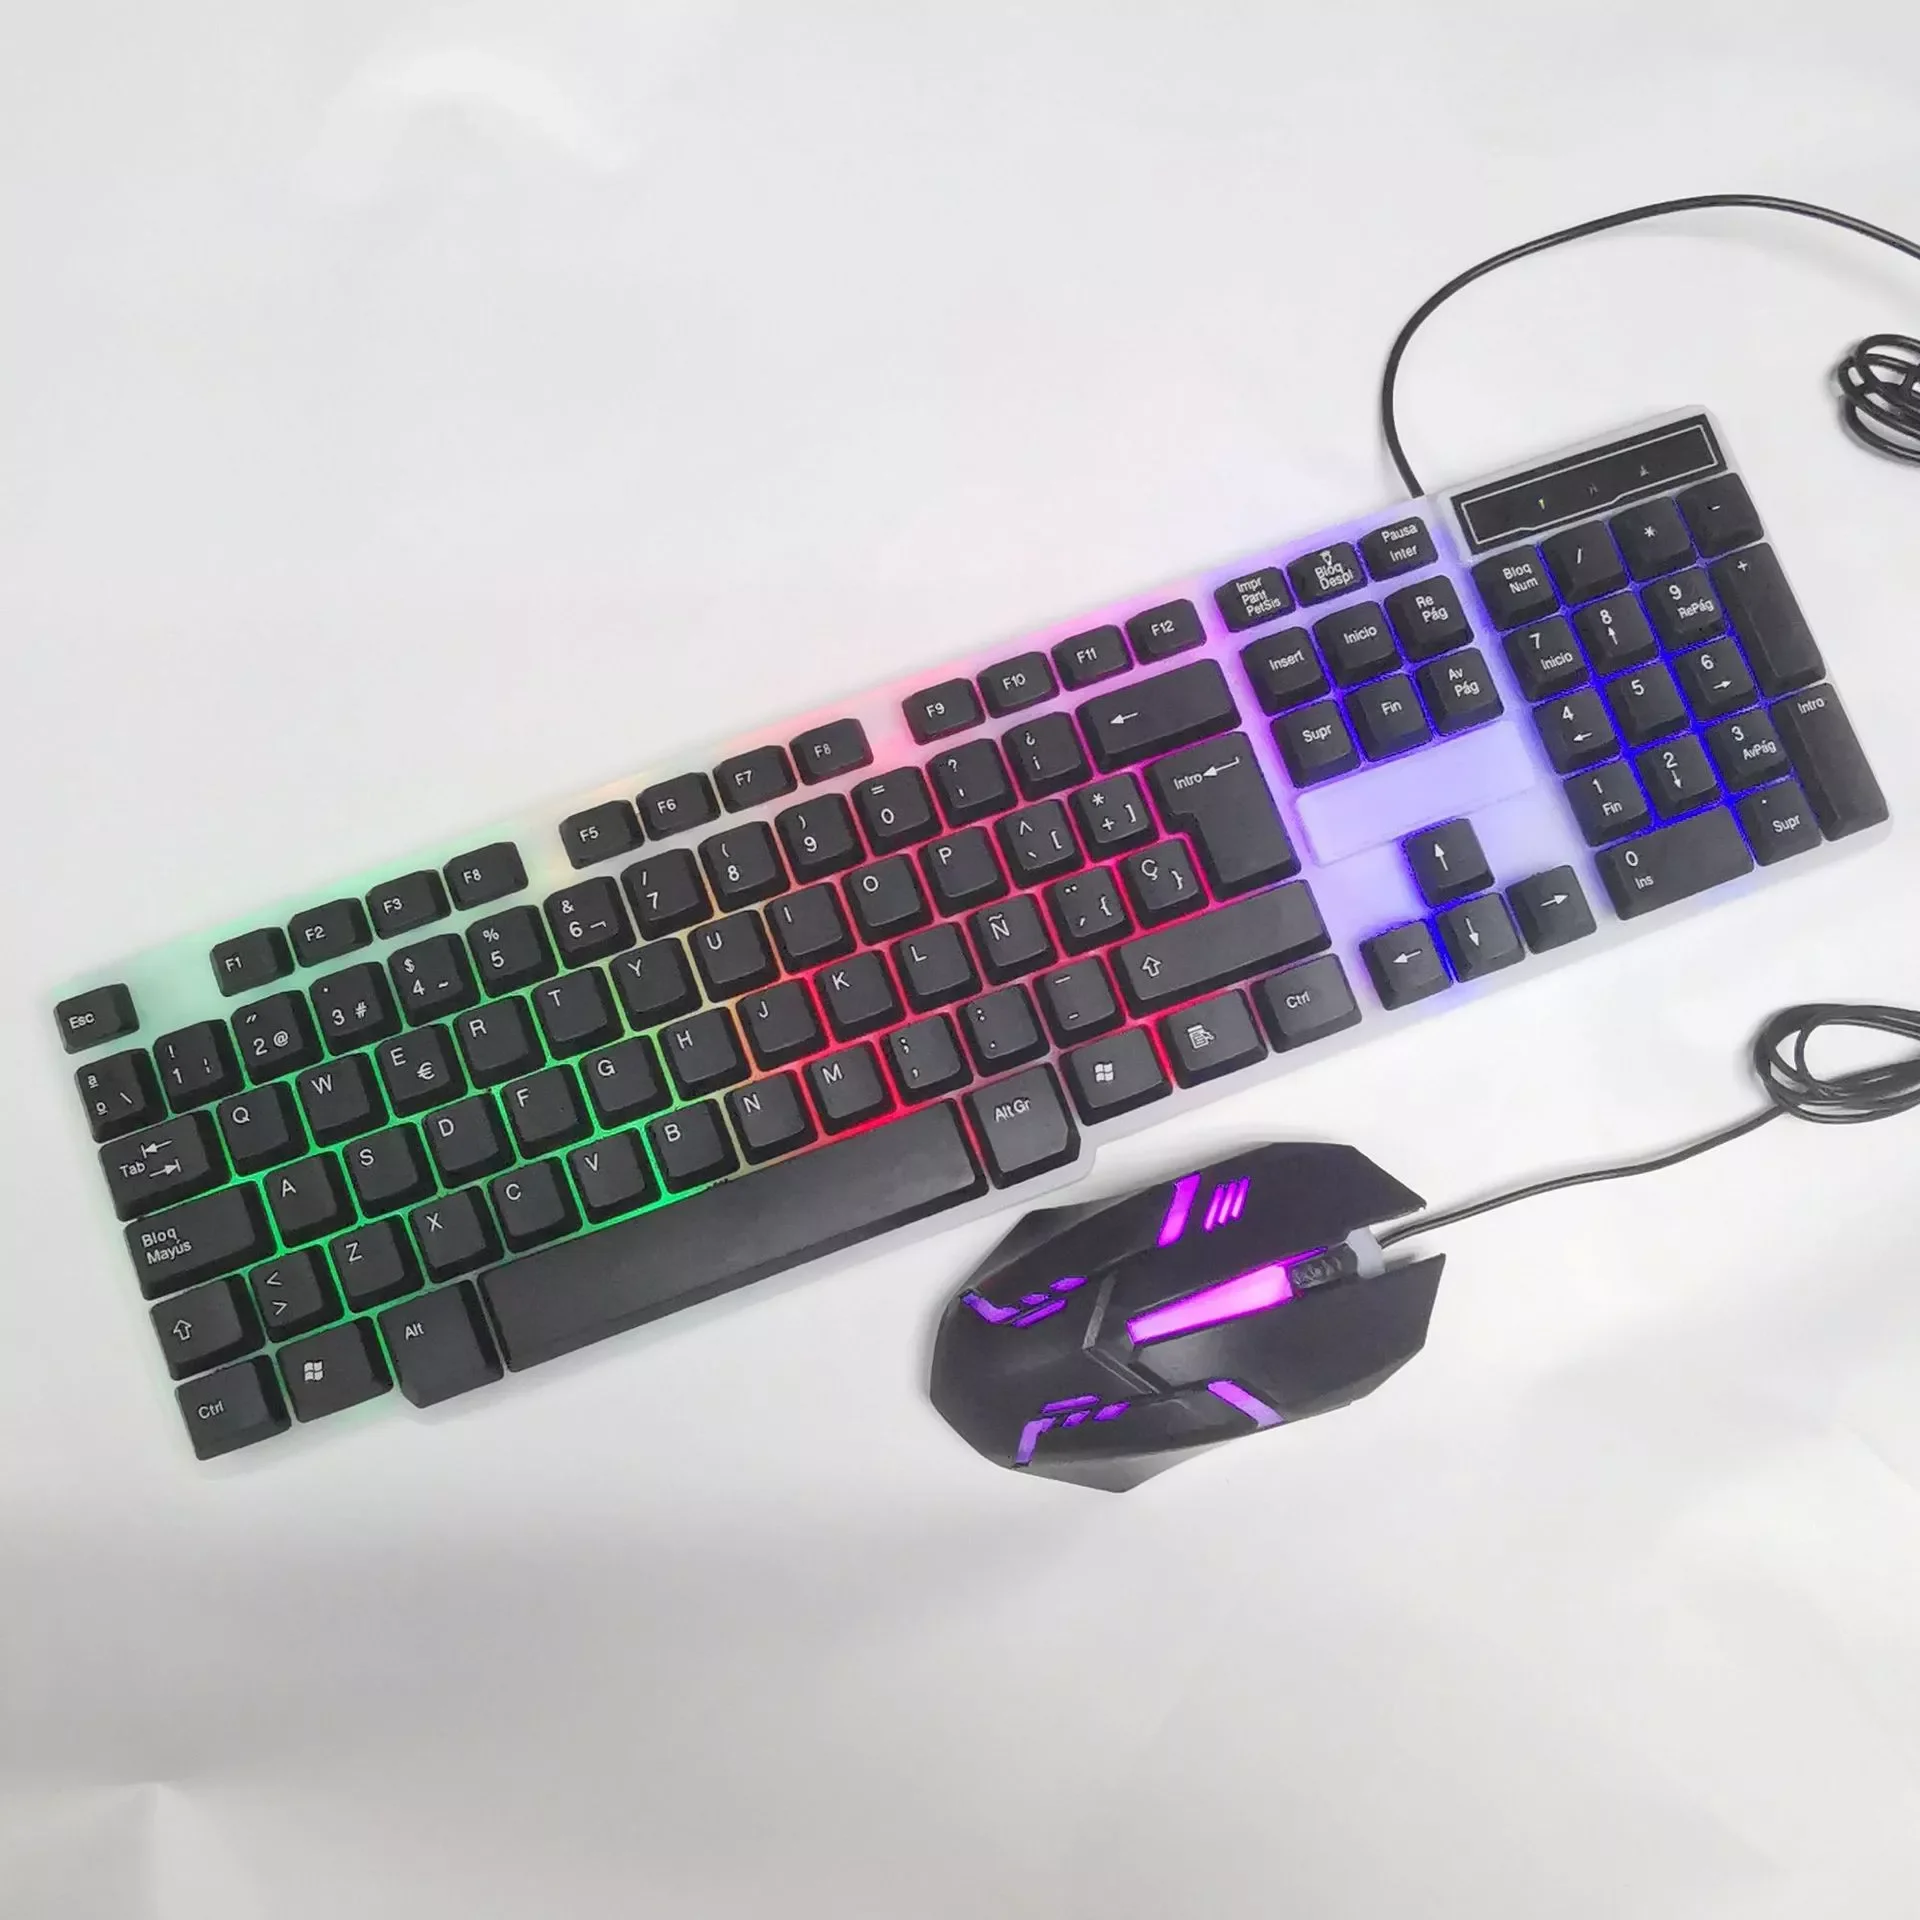 

105 Keys Backlight Keyboard Ergonomic Mouse Kit USB Wired Spanish Keyboard Mouse Combo with Suspended Keycaps Plug and Play